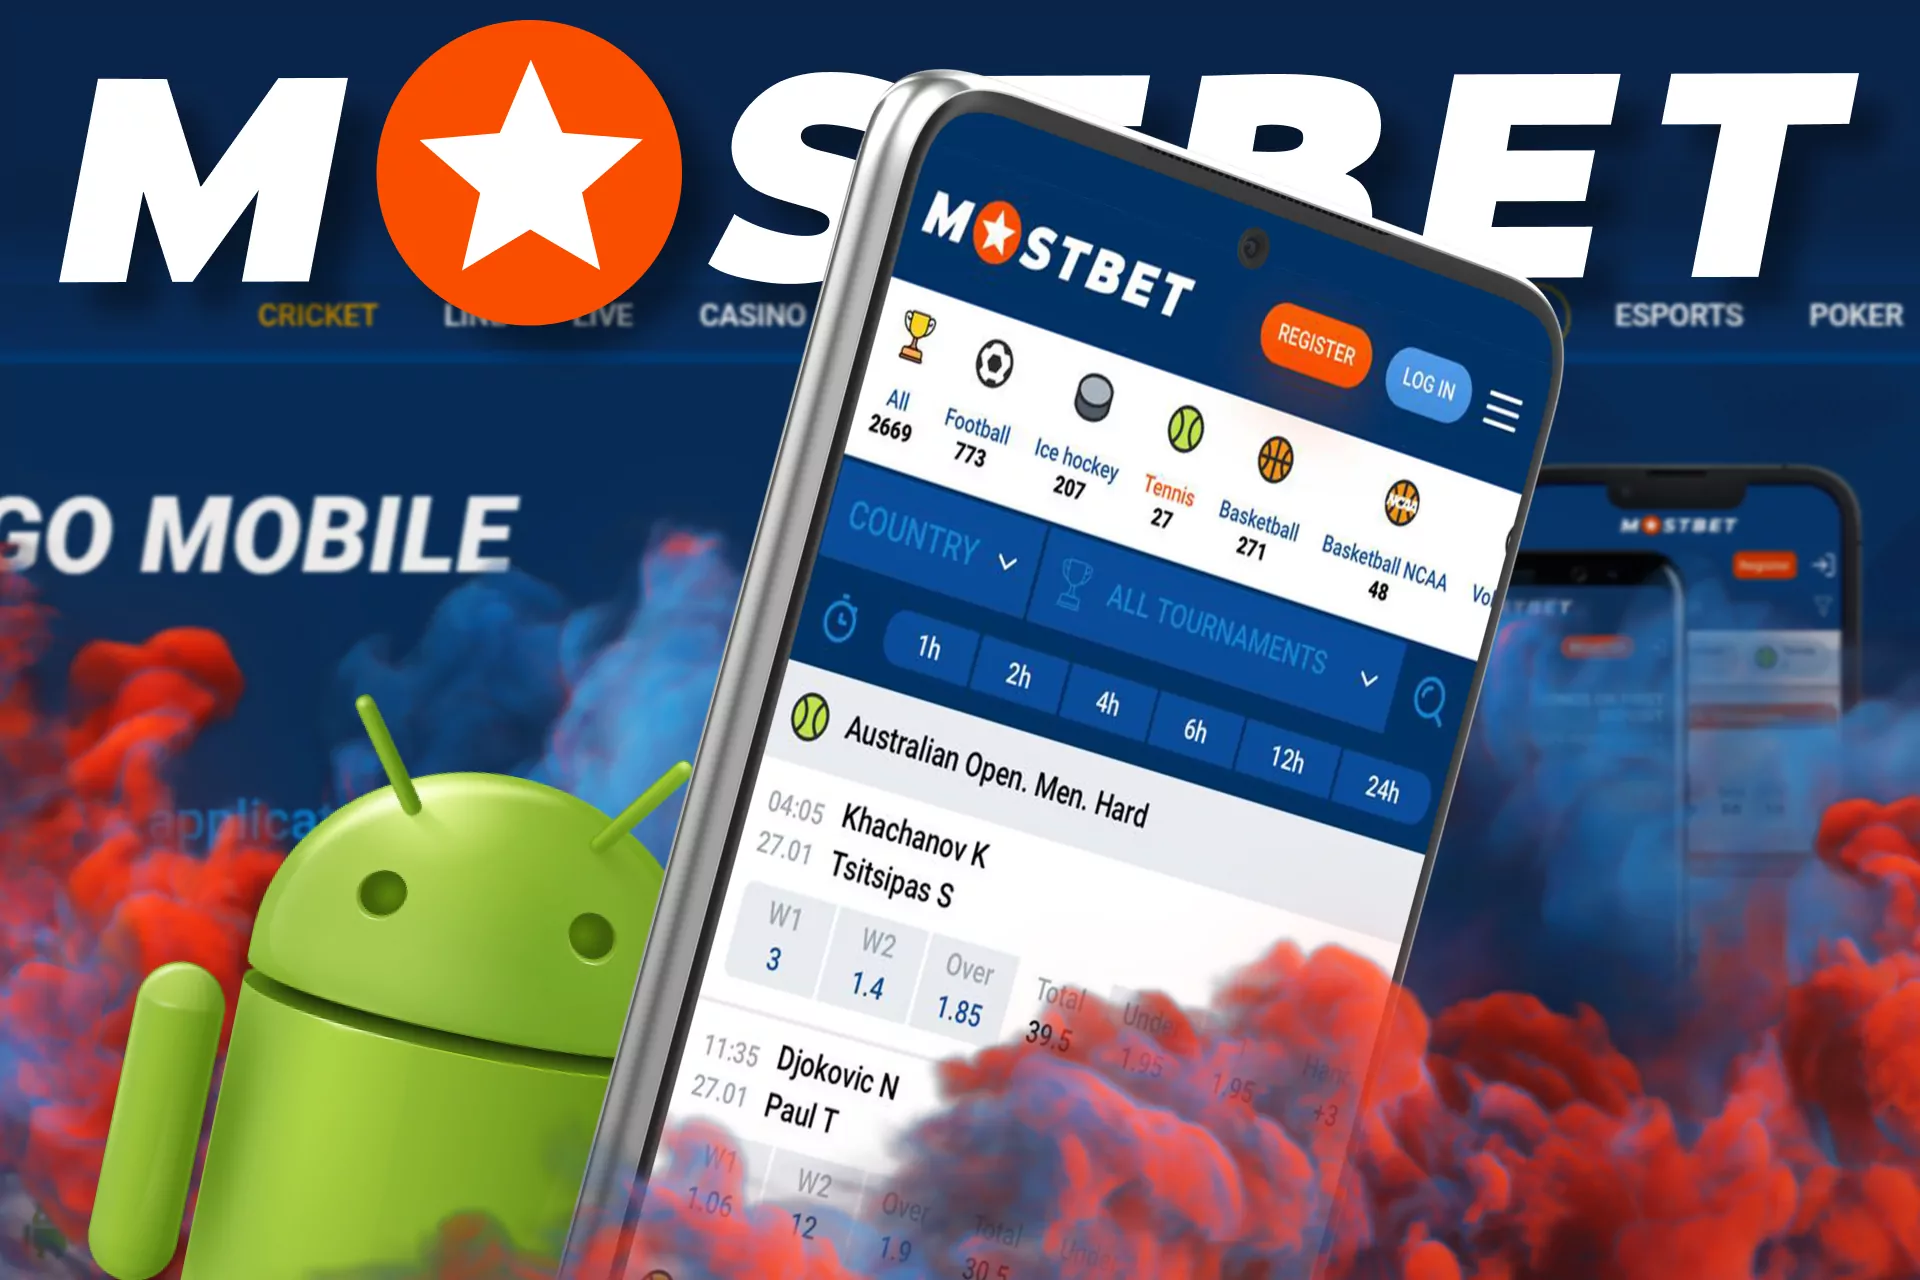 With the Mostbet app you can bet on tennis on your Android device anywhere.